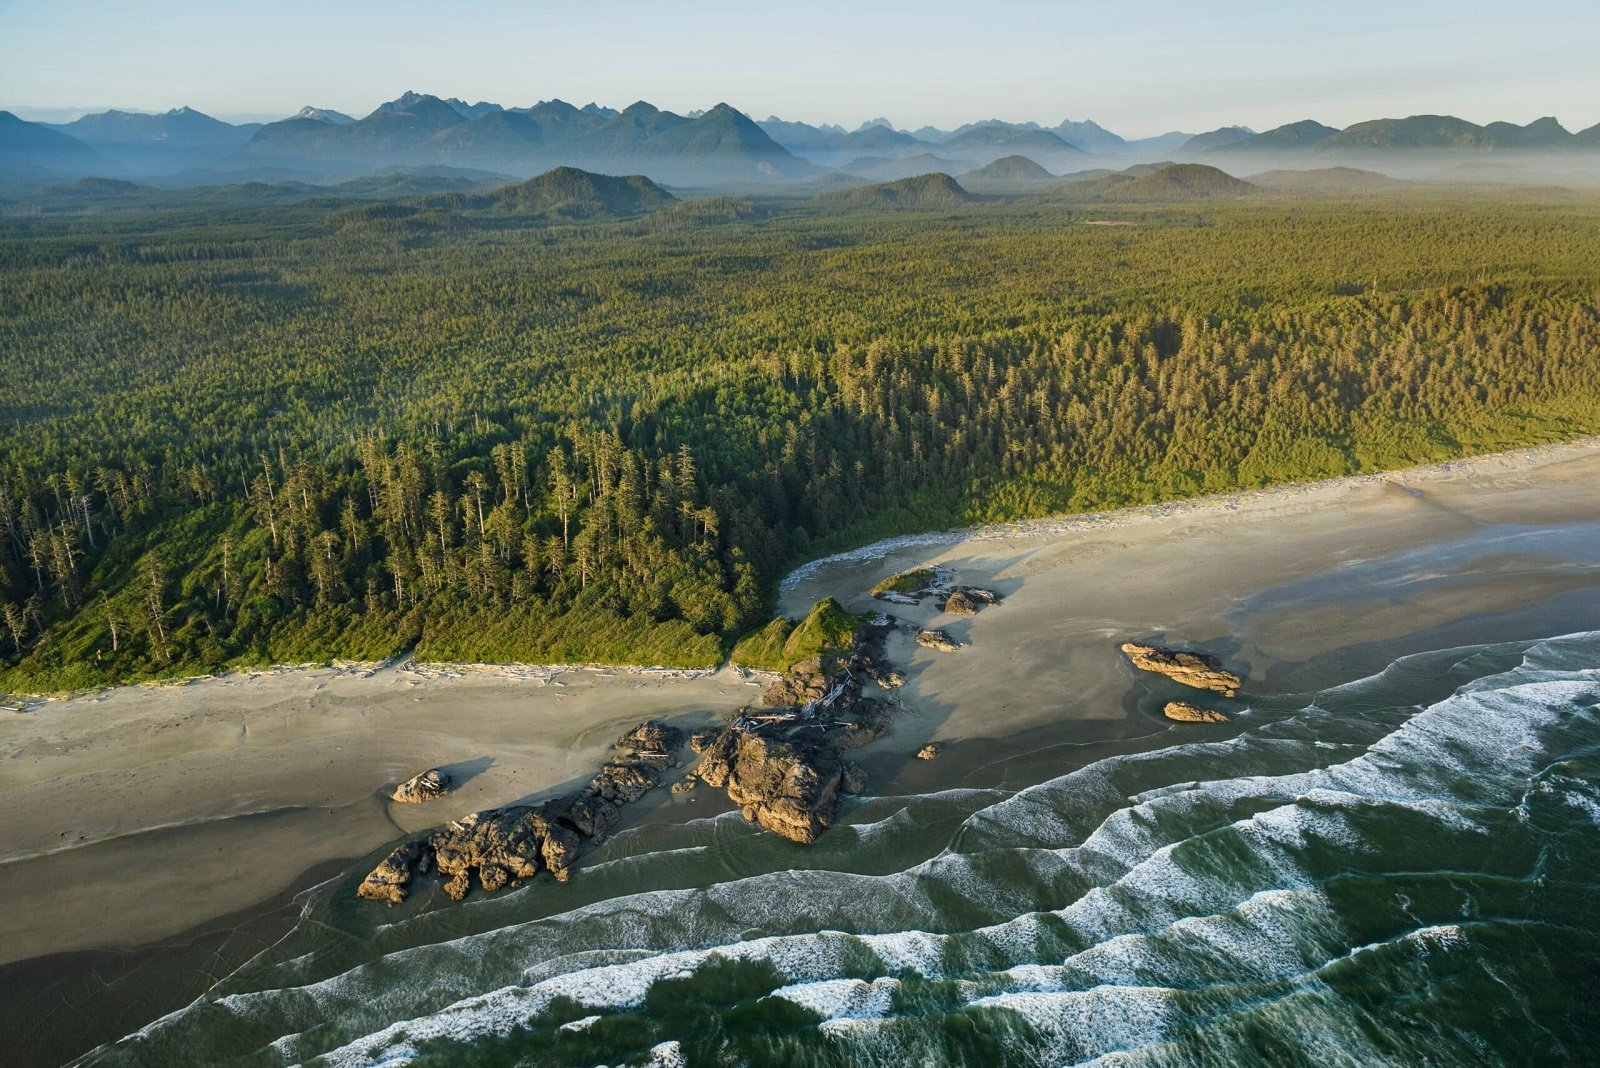 <p><span>On Vancouver Island’s west coast, Tofino is a haven for eco-tourism, known for its rugged coastline and temperate rainforests. This small district is big on sustainable practices, offering eco-friendly accommodations, local culinary experiences, and a range of outdoor activities like surfing, kayaking, and bear-watching.</span></p> <p><span>The community’s commitment to preserving its natural environment is evident in its support for local conservation initiatives and sustainable tourism practices. Tofino’s blend of natural beauty and eco-consciousness makes it a model destination for responsible travel.</span></p> <p><b>Insider’s Tip: </b><span>Participate in a beach clean-up or environmental workshop offered by local organizations. </span></p> <p><b>How to Get There: </b><span>Fly to Vancouver, take a ferry to Vancouver Island, and drive to Tofino. </span></p> <p><b>When to Travel: </b><span>Summer for surfing and beach activities; winter for storm watching.</span></p>